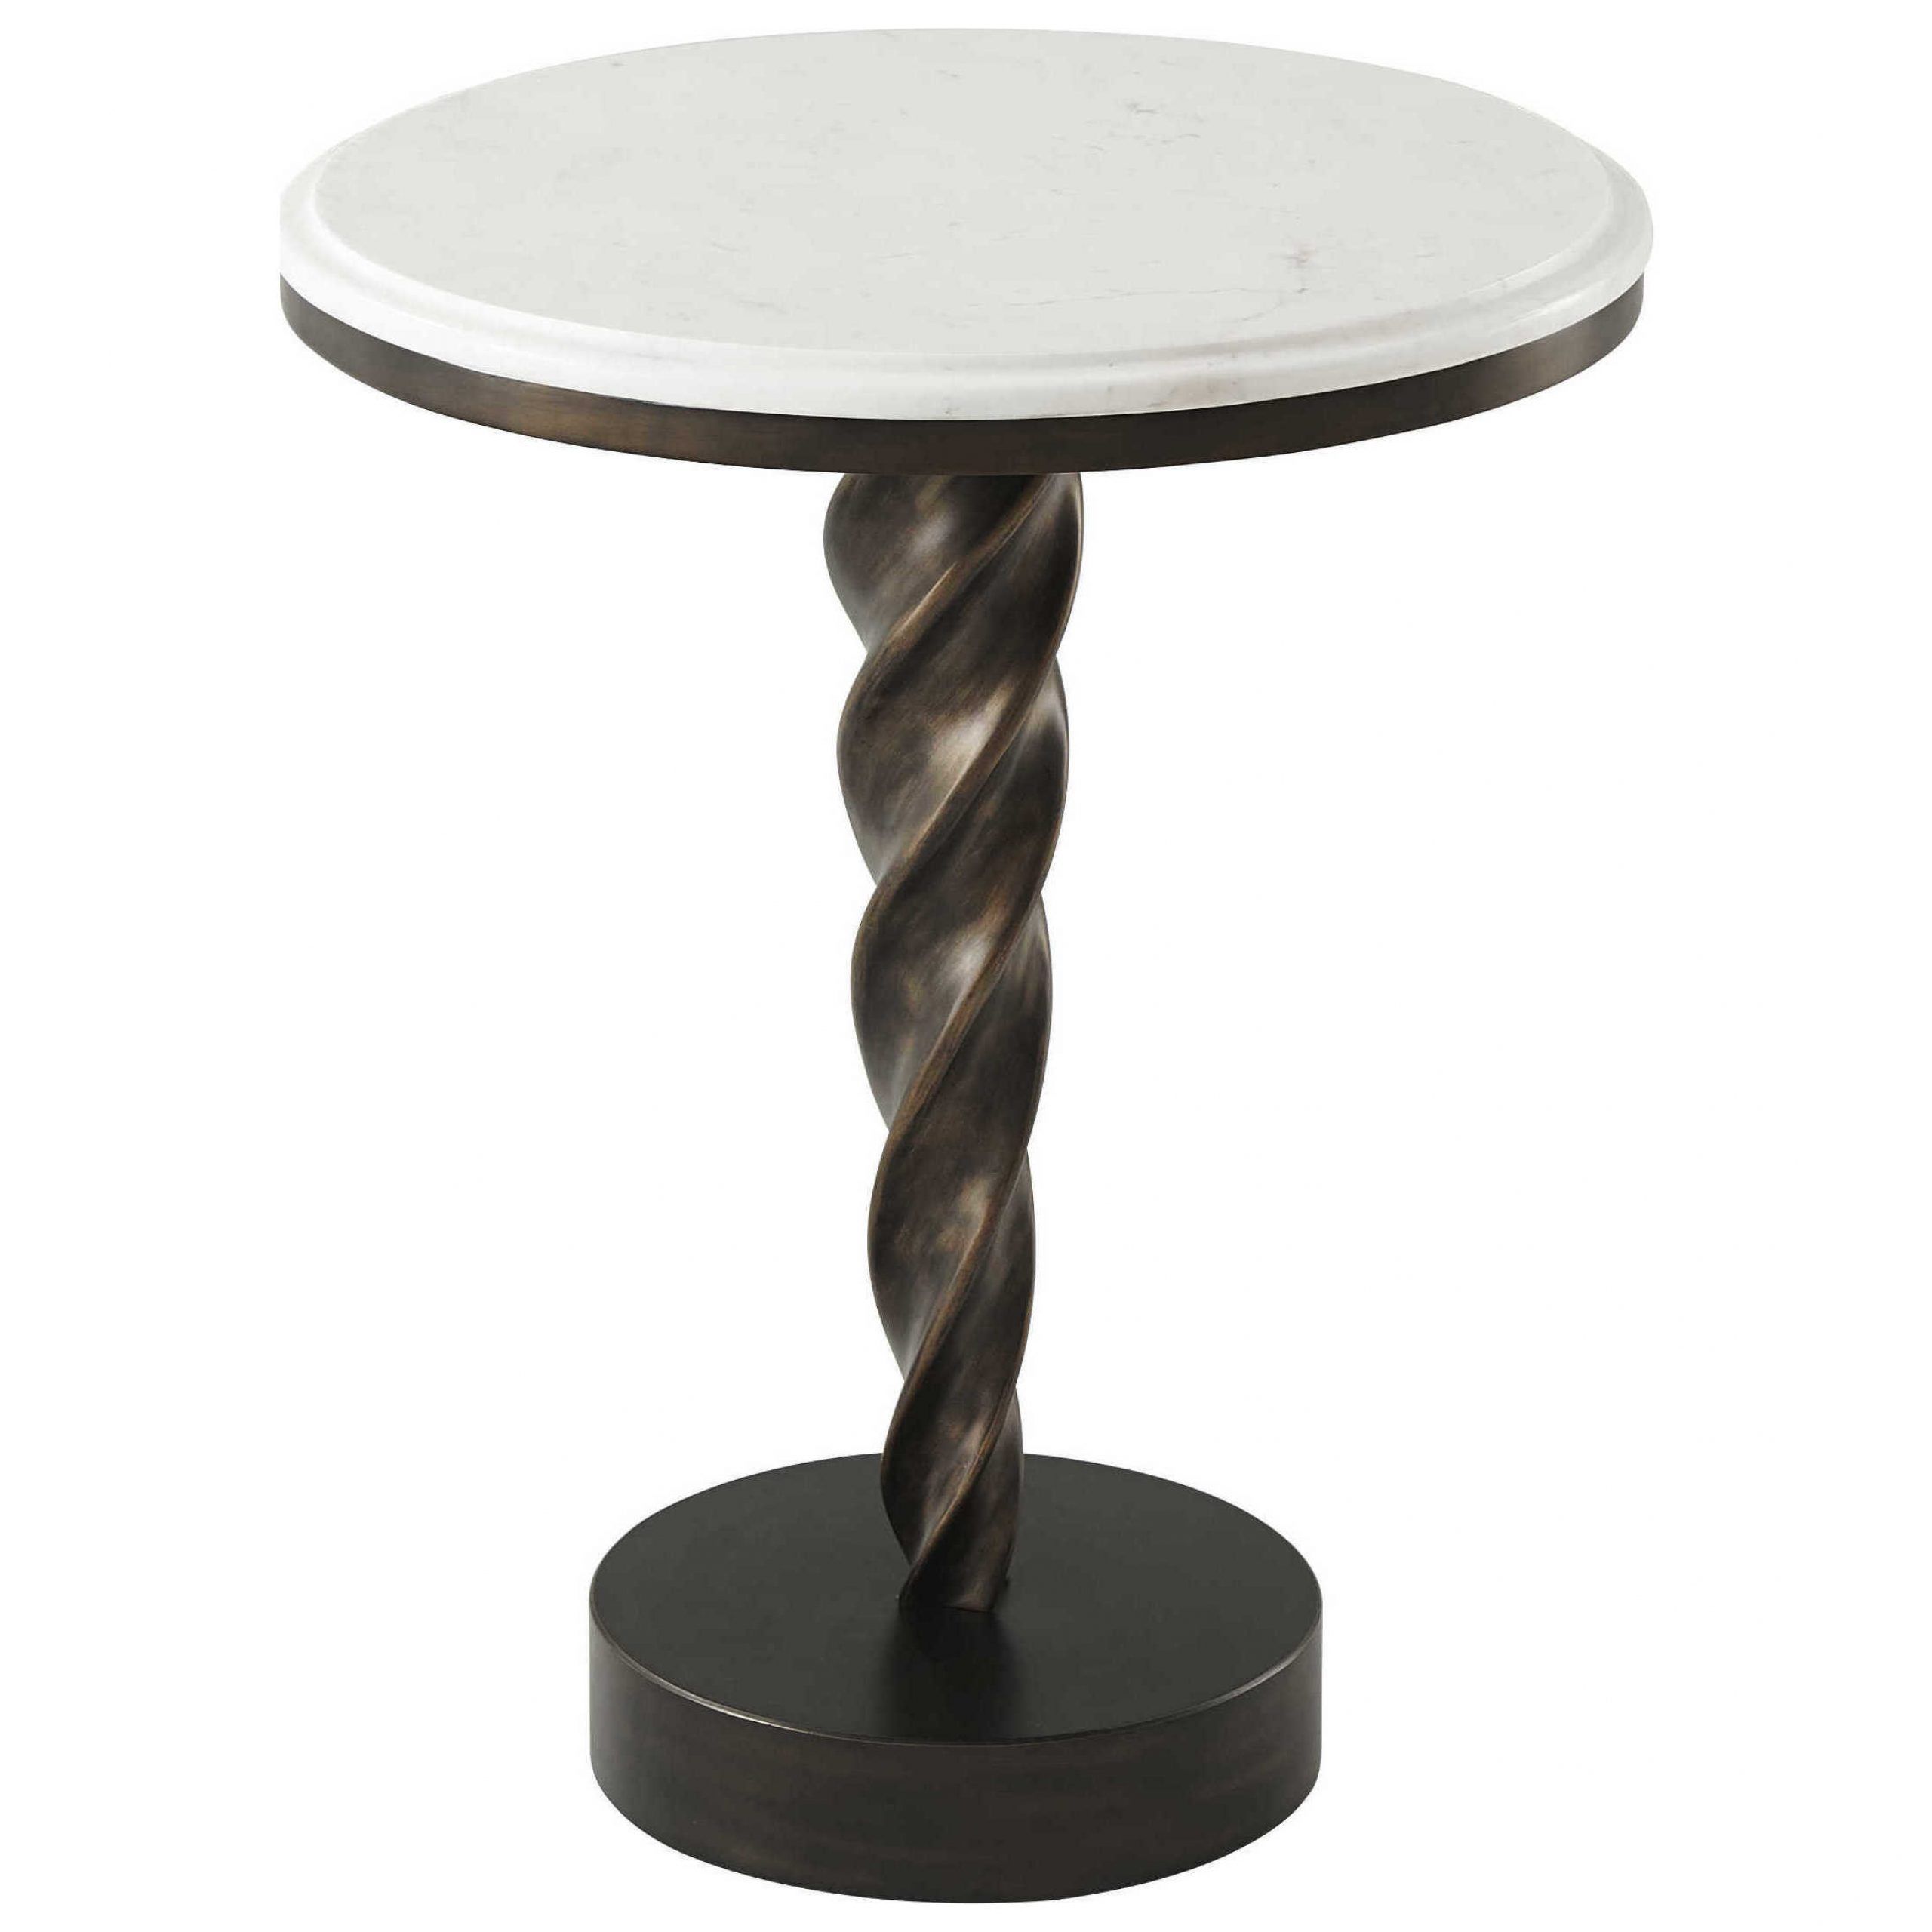 Theodore Alexander Marble / Aluminum 18'' Wide Round Pedestal Table Pertaining To Current Alexandra Round Marble Pedestal Dining Tables (View 19 of 25)